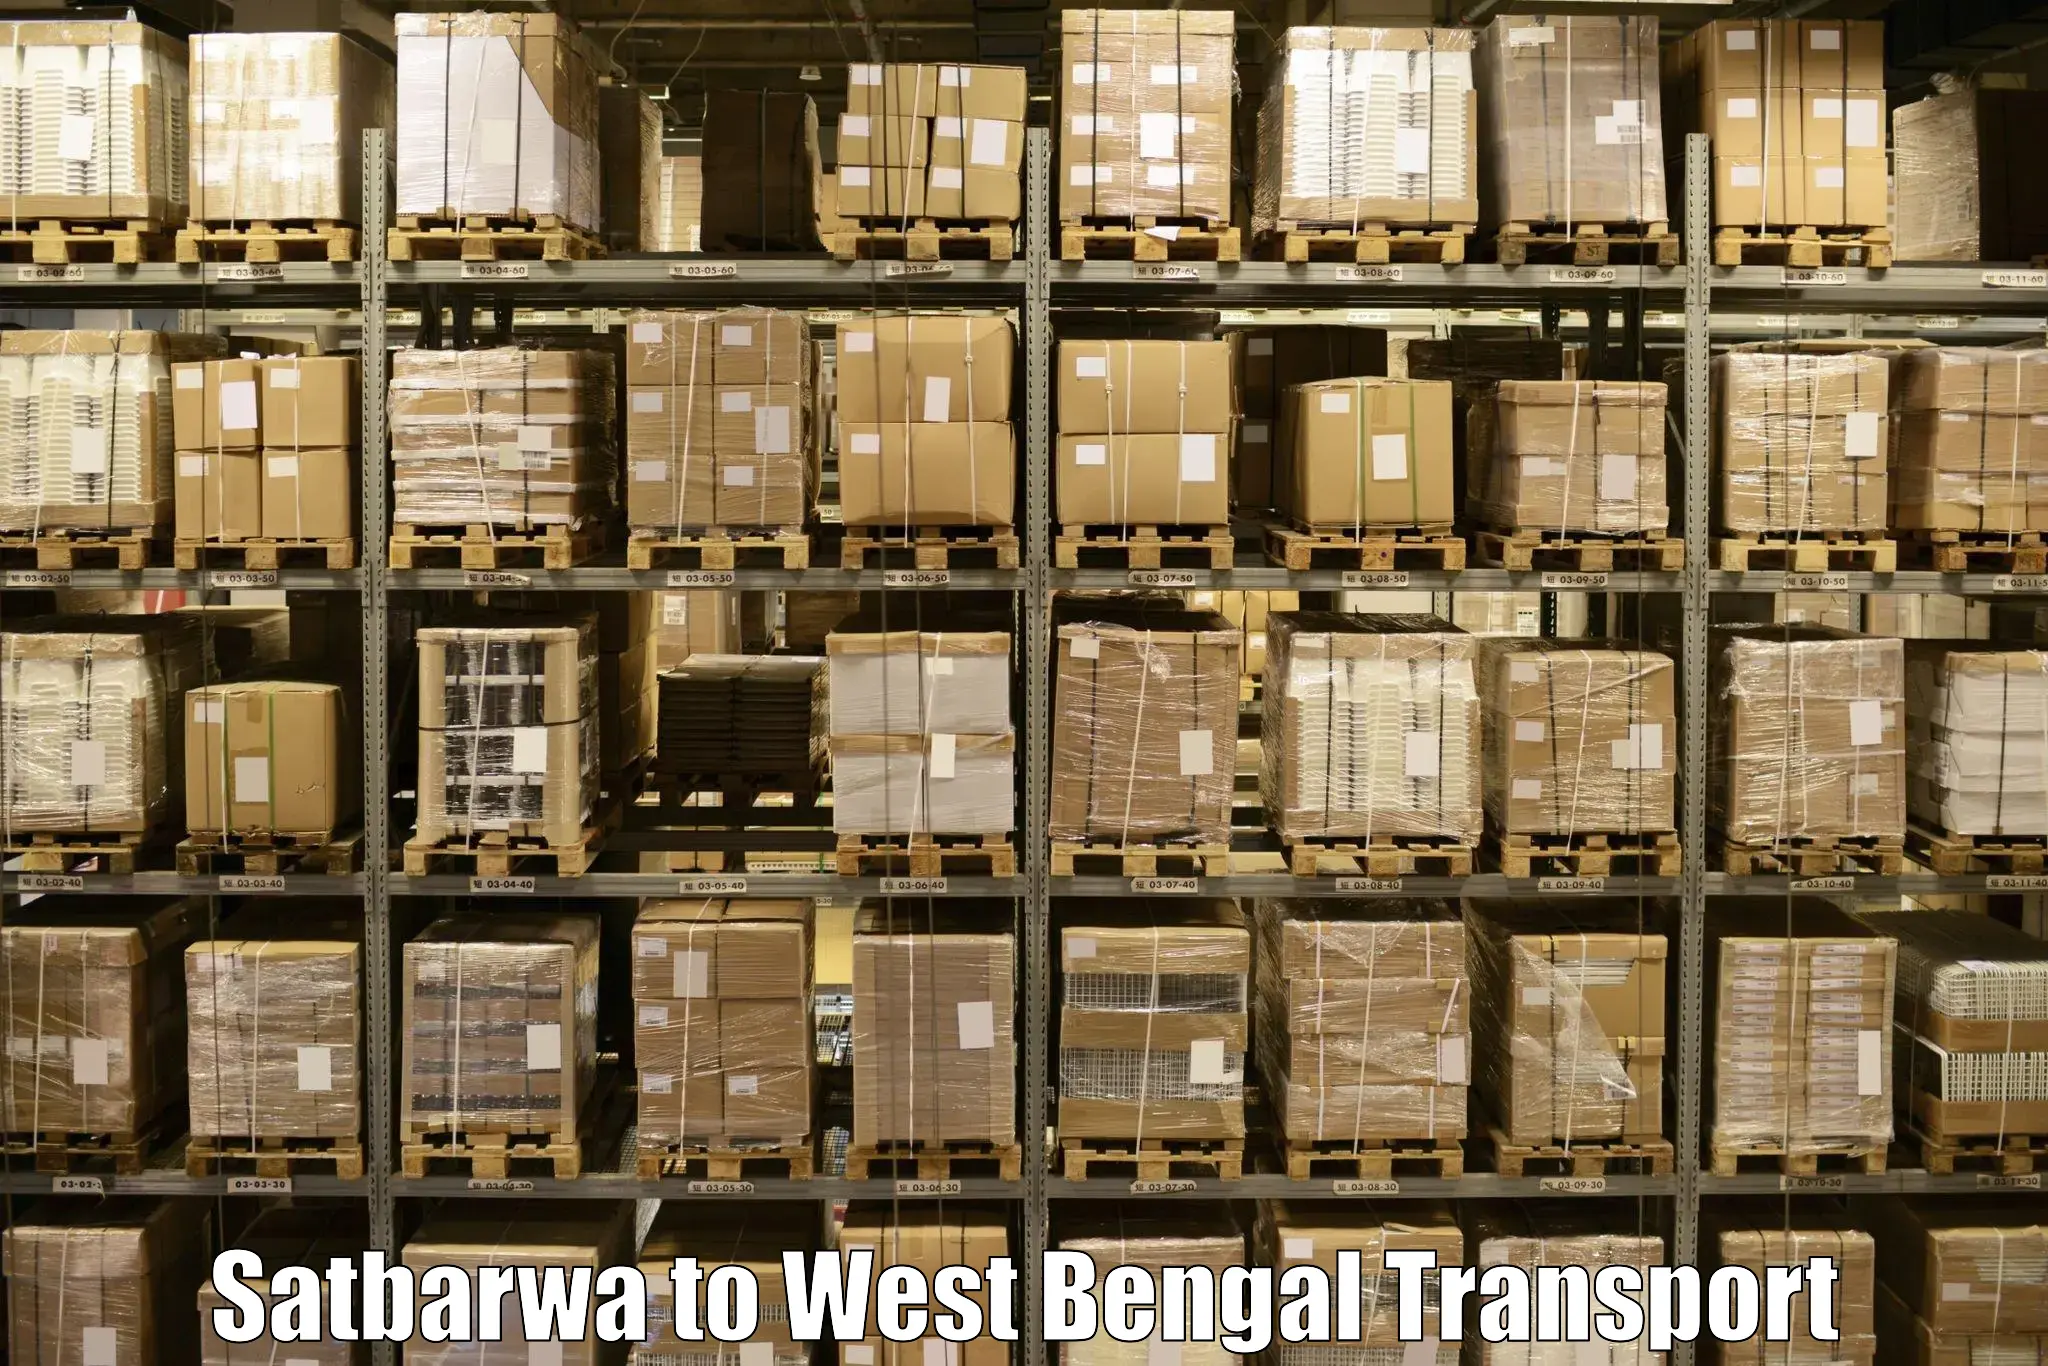 Nearby transport service Satbarwa to West Bengal